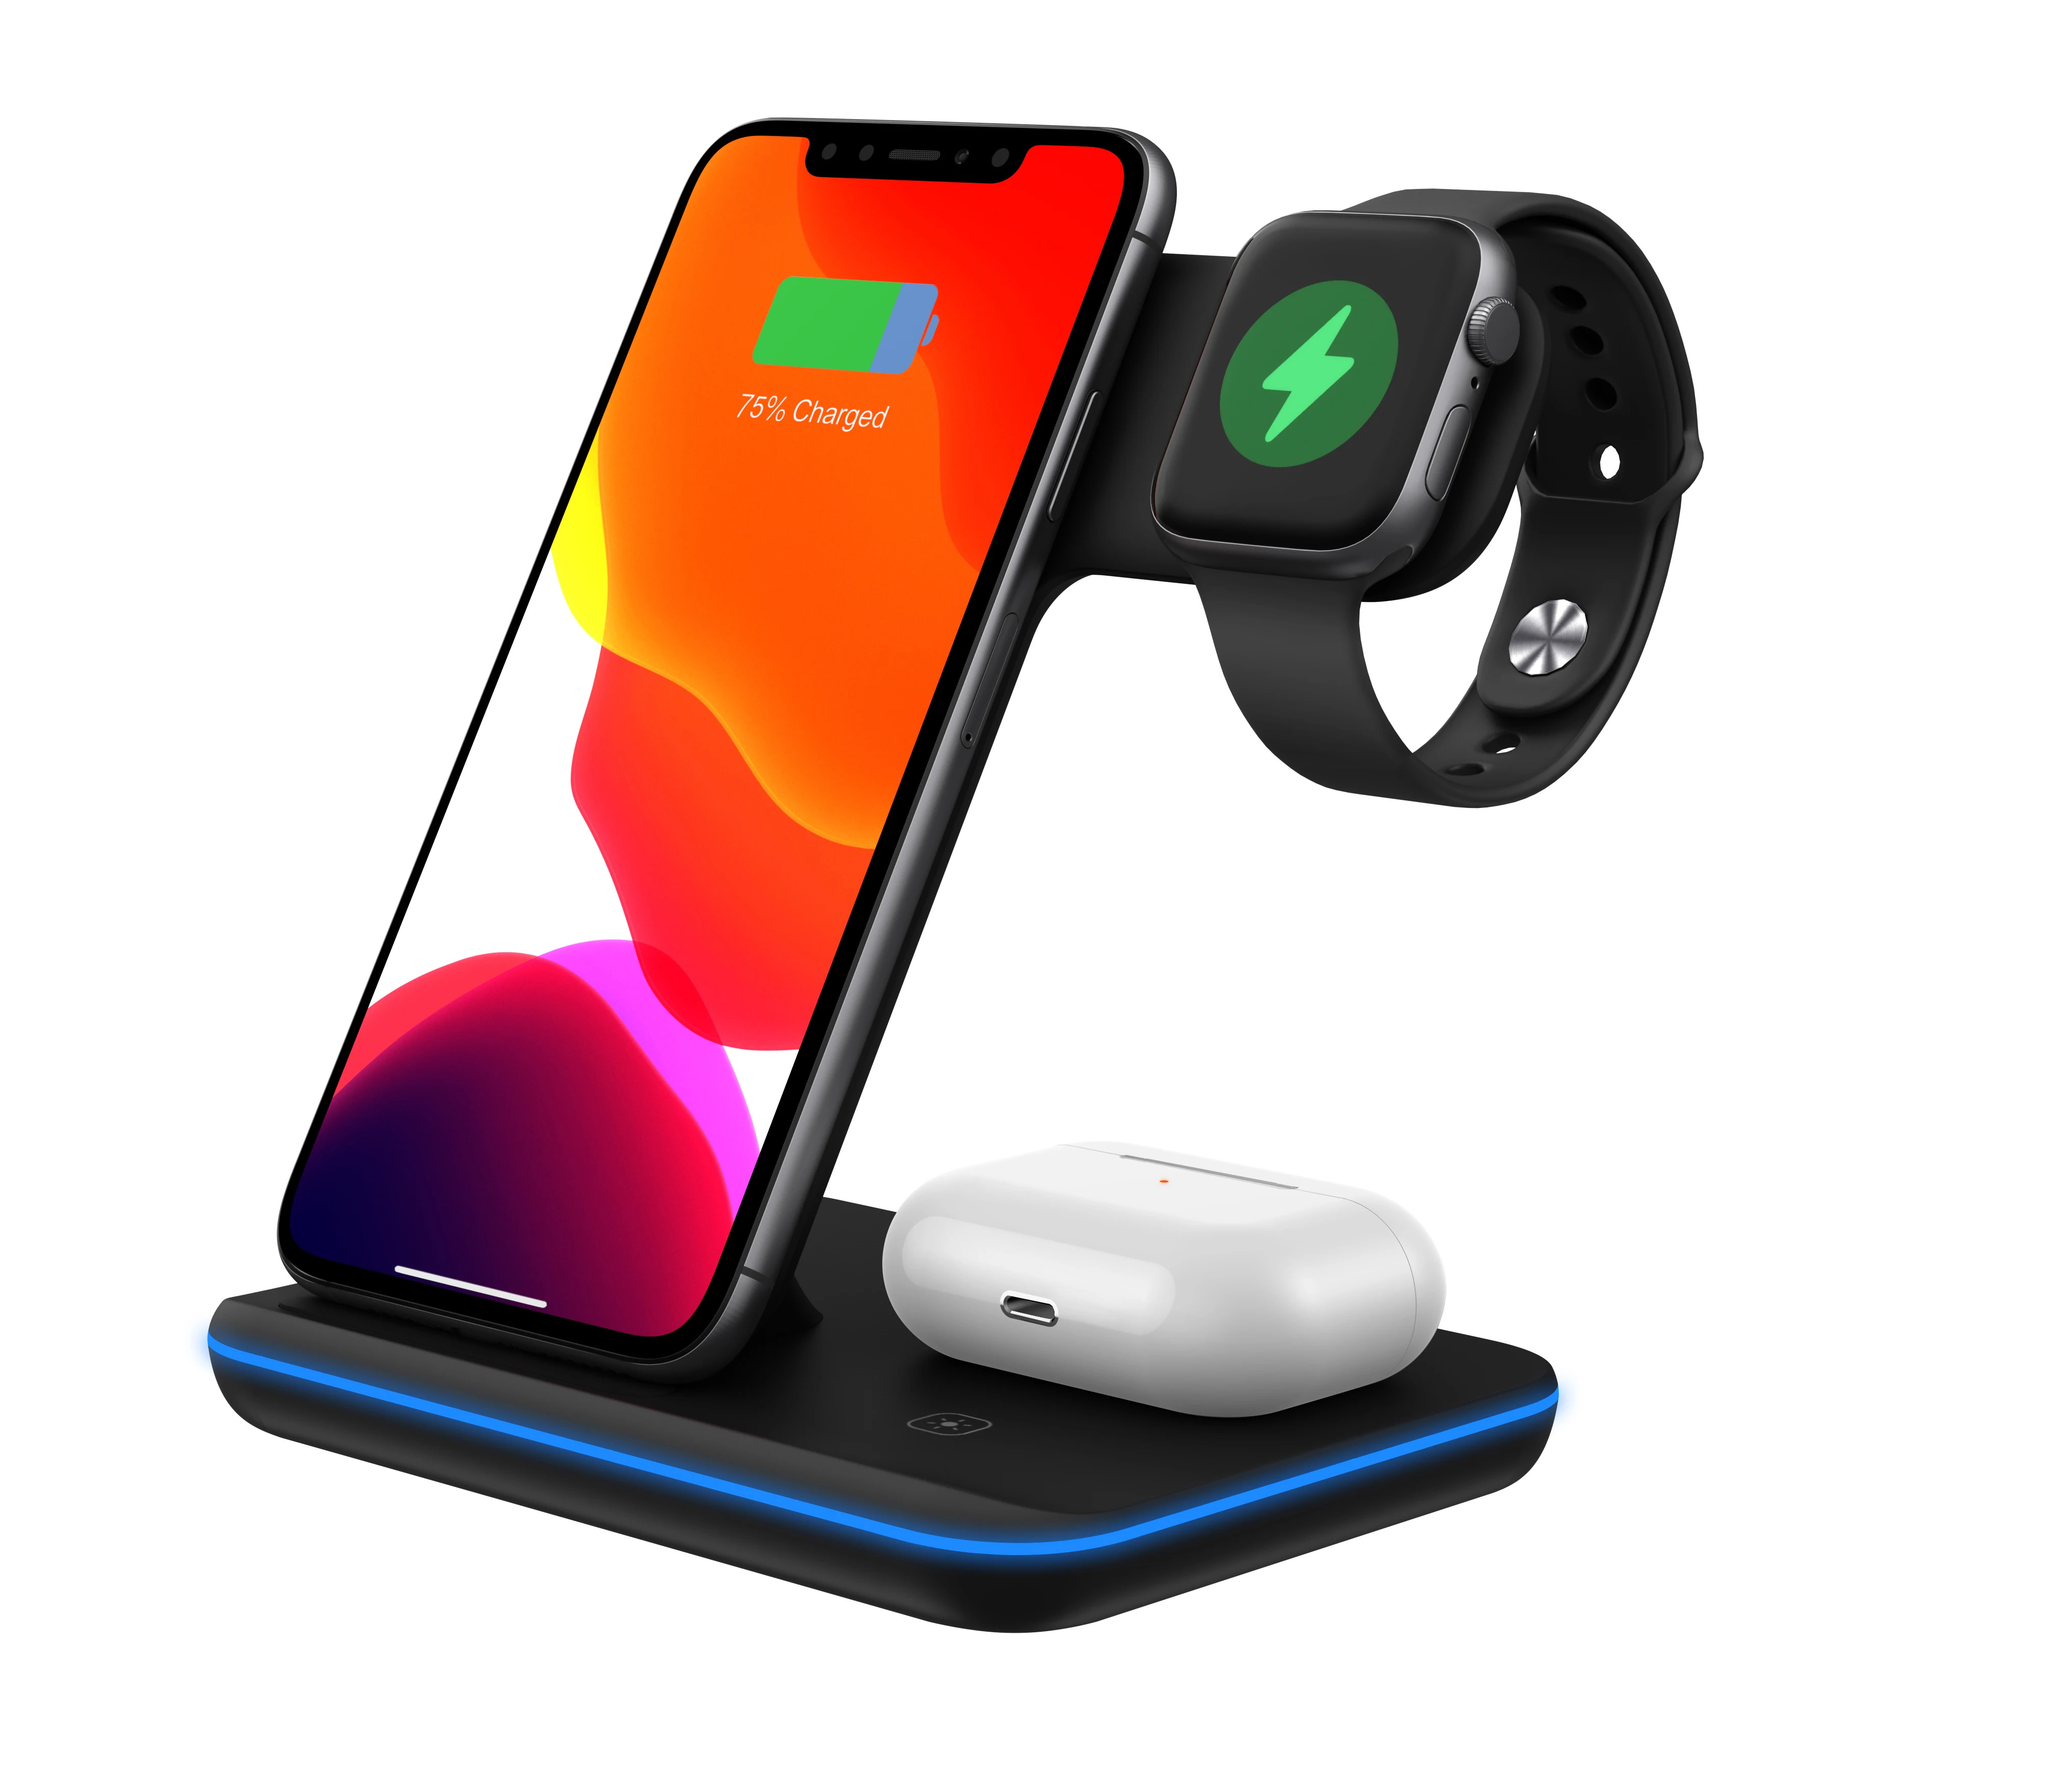 

New Arrival Qi 3-in-1 Quick 15W Fast Charging Dock Stand Station 3 In 1 Wireless Charger For iPhone 12/Samsung, Black, white